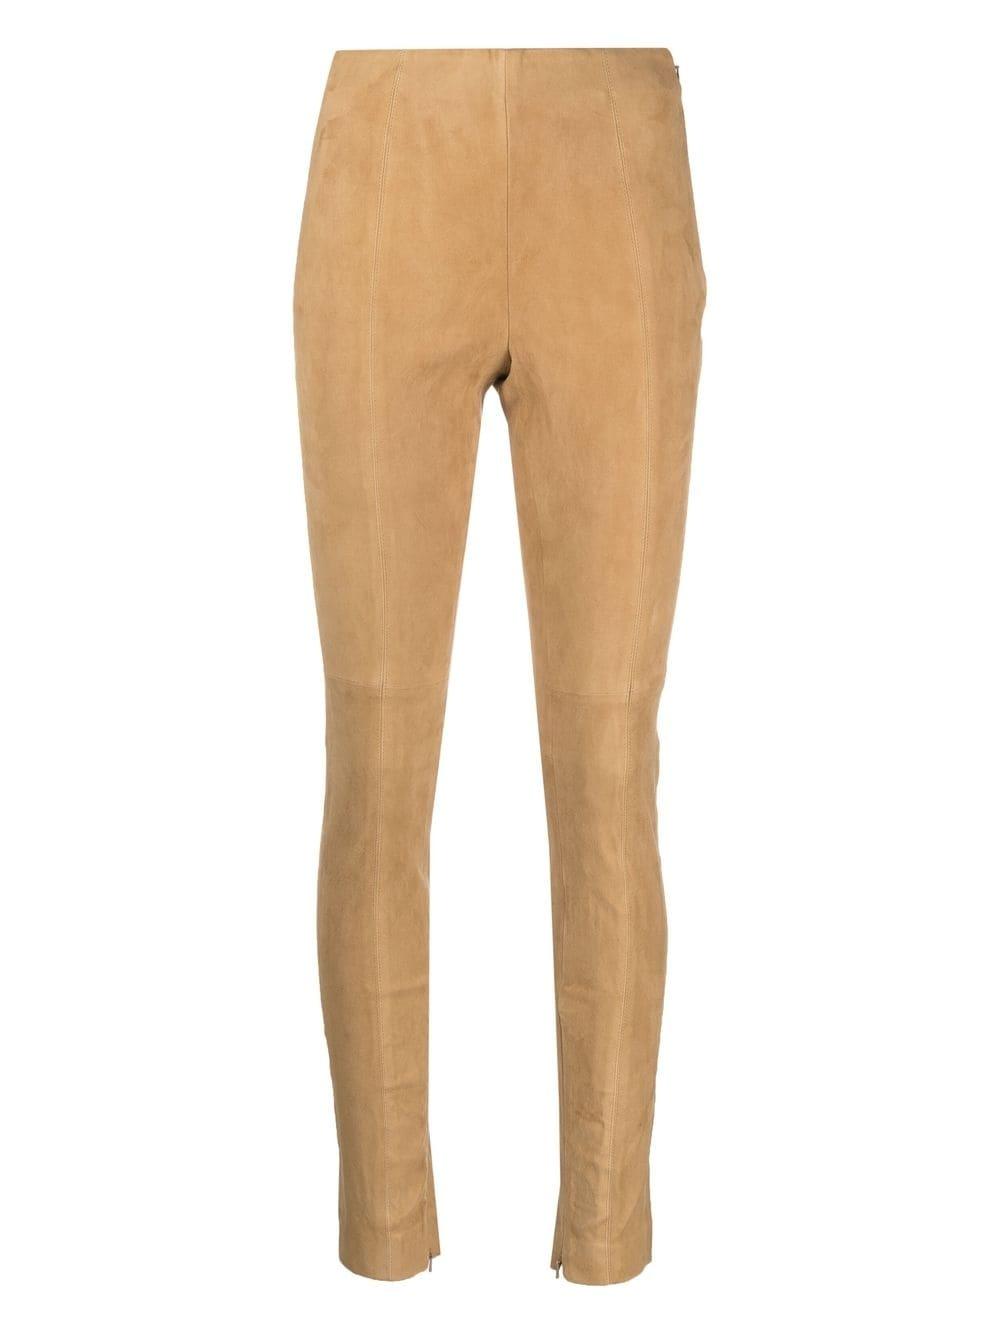 Polo Ralph Lauren Tonal Stitching Leather leggings in Natural | Lyst